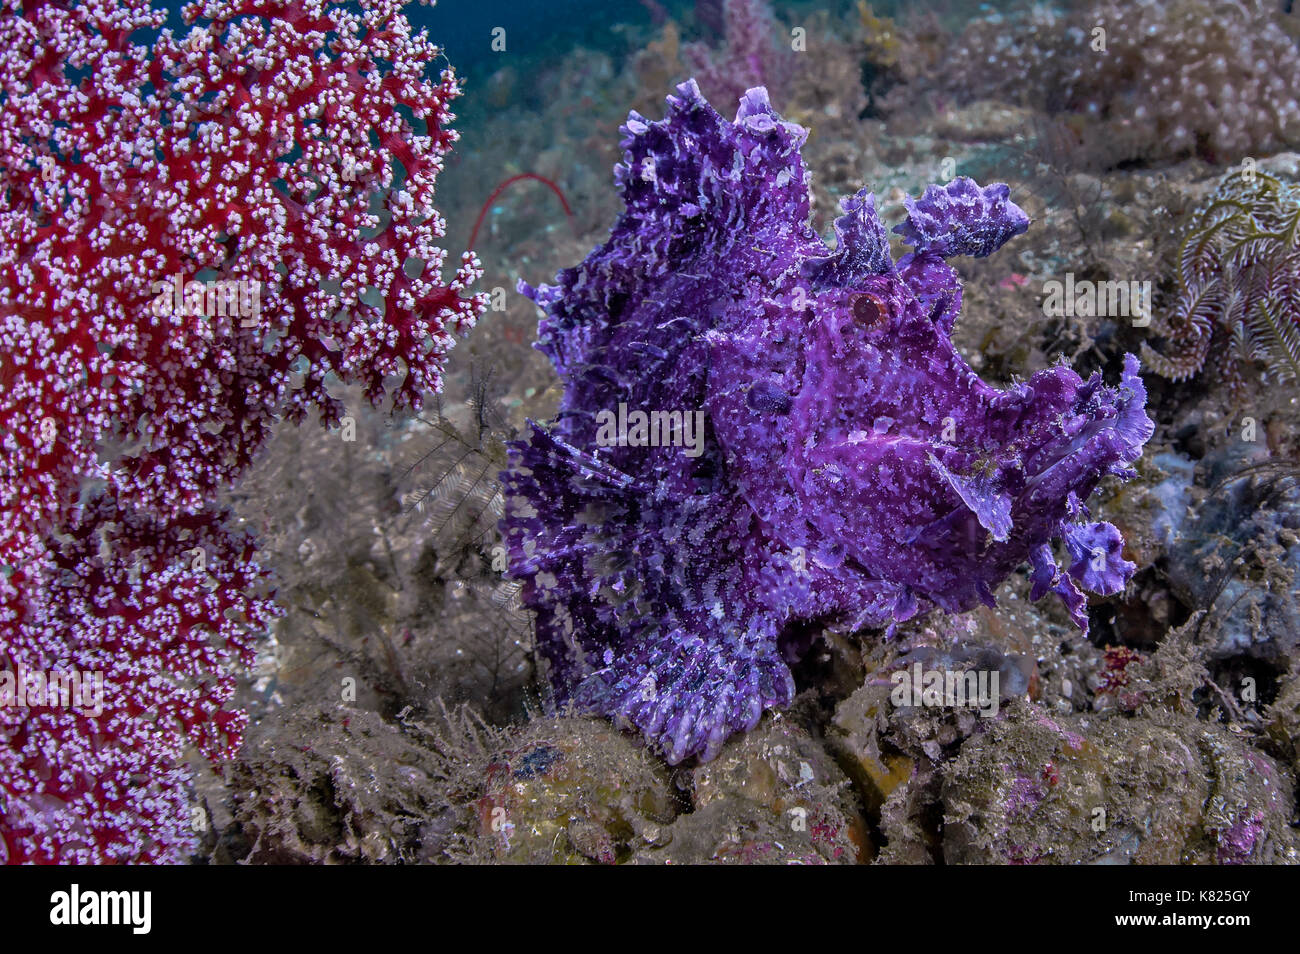 Rhinopias frondosa, also known as weedy scorpionfish sits on seafloor camouflaged next to a soft coral tree. Ambon, Indonesia Stock Photo